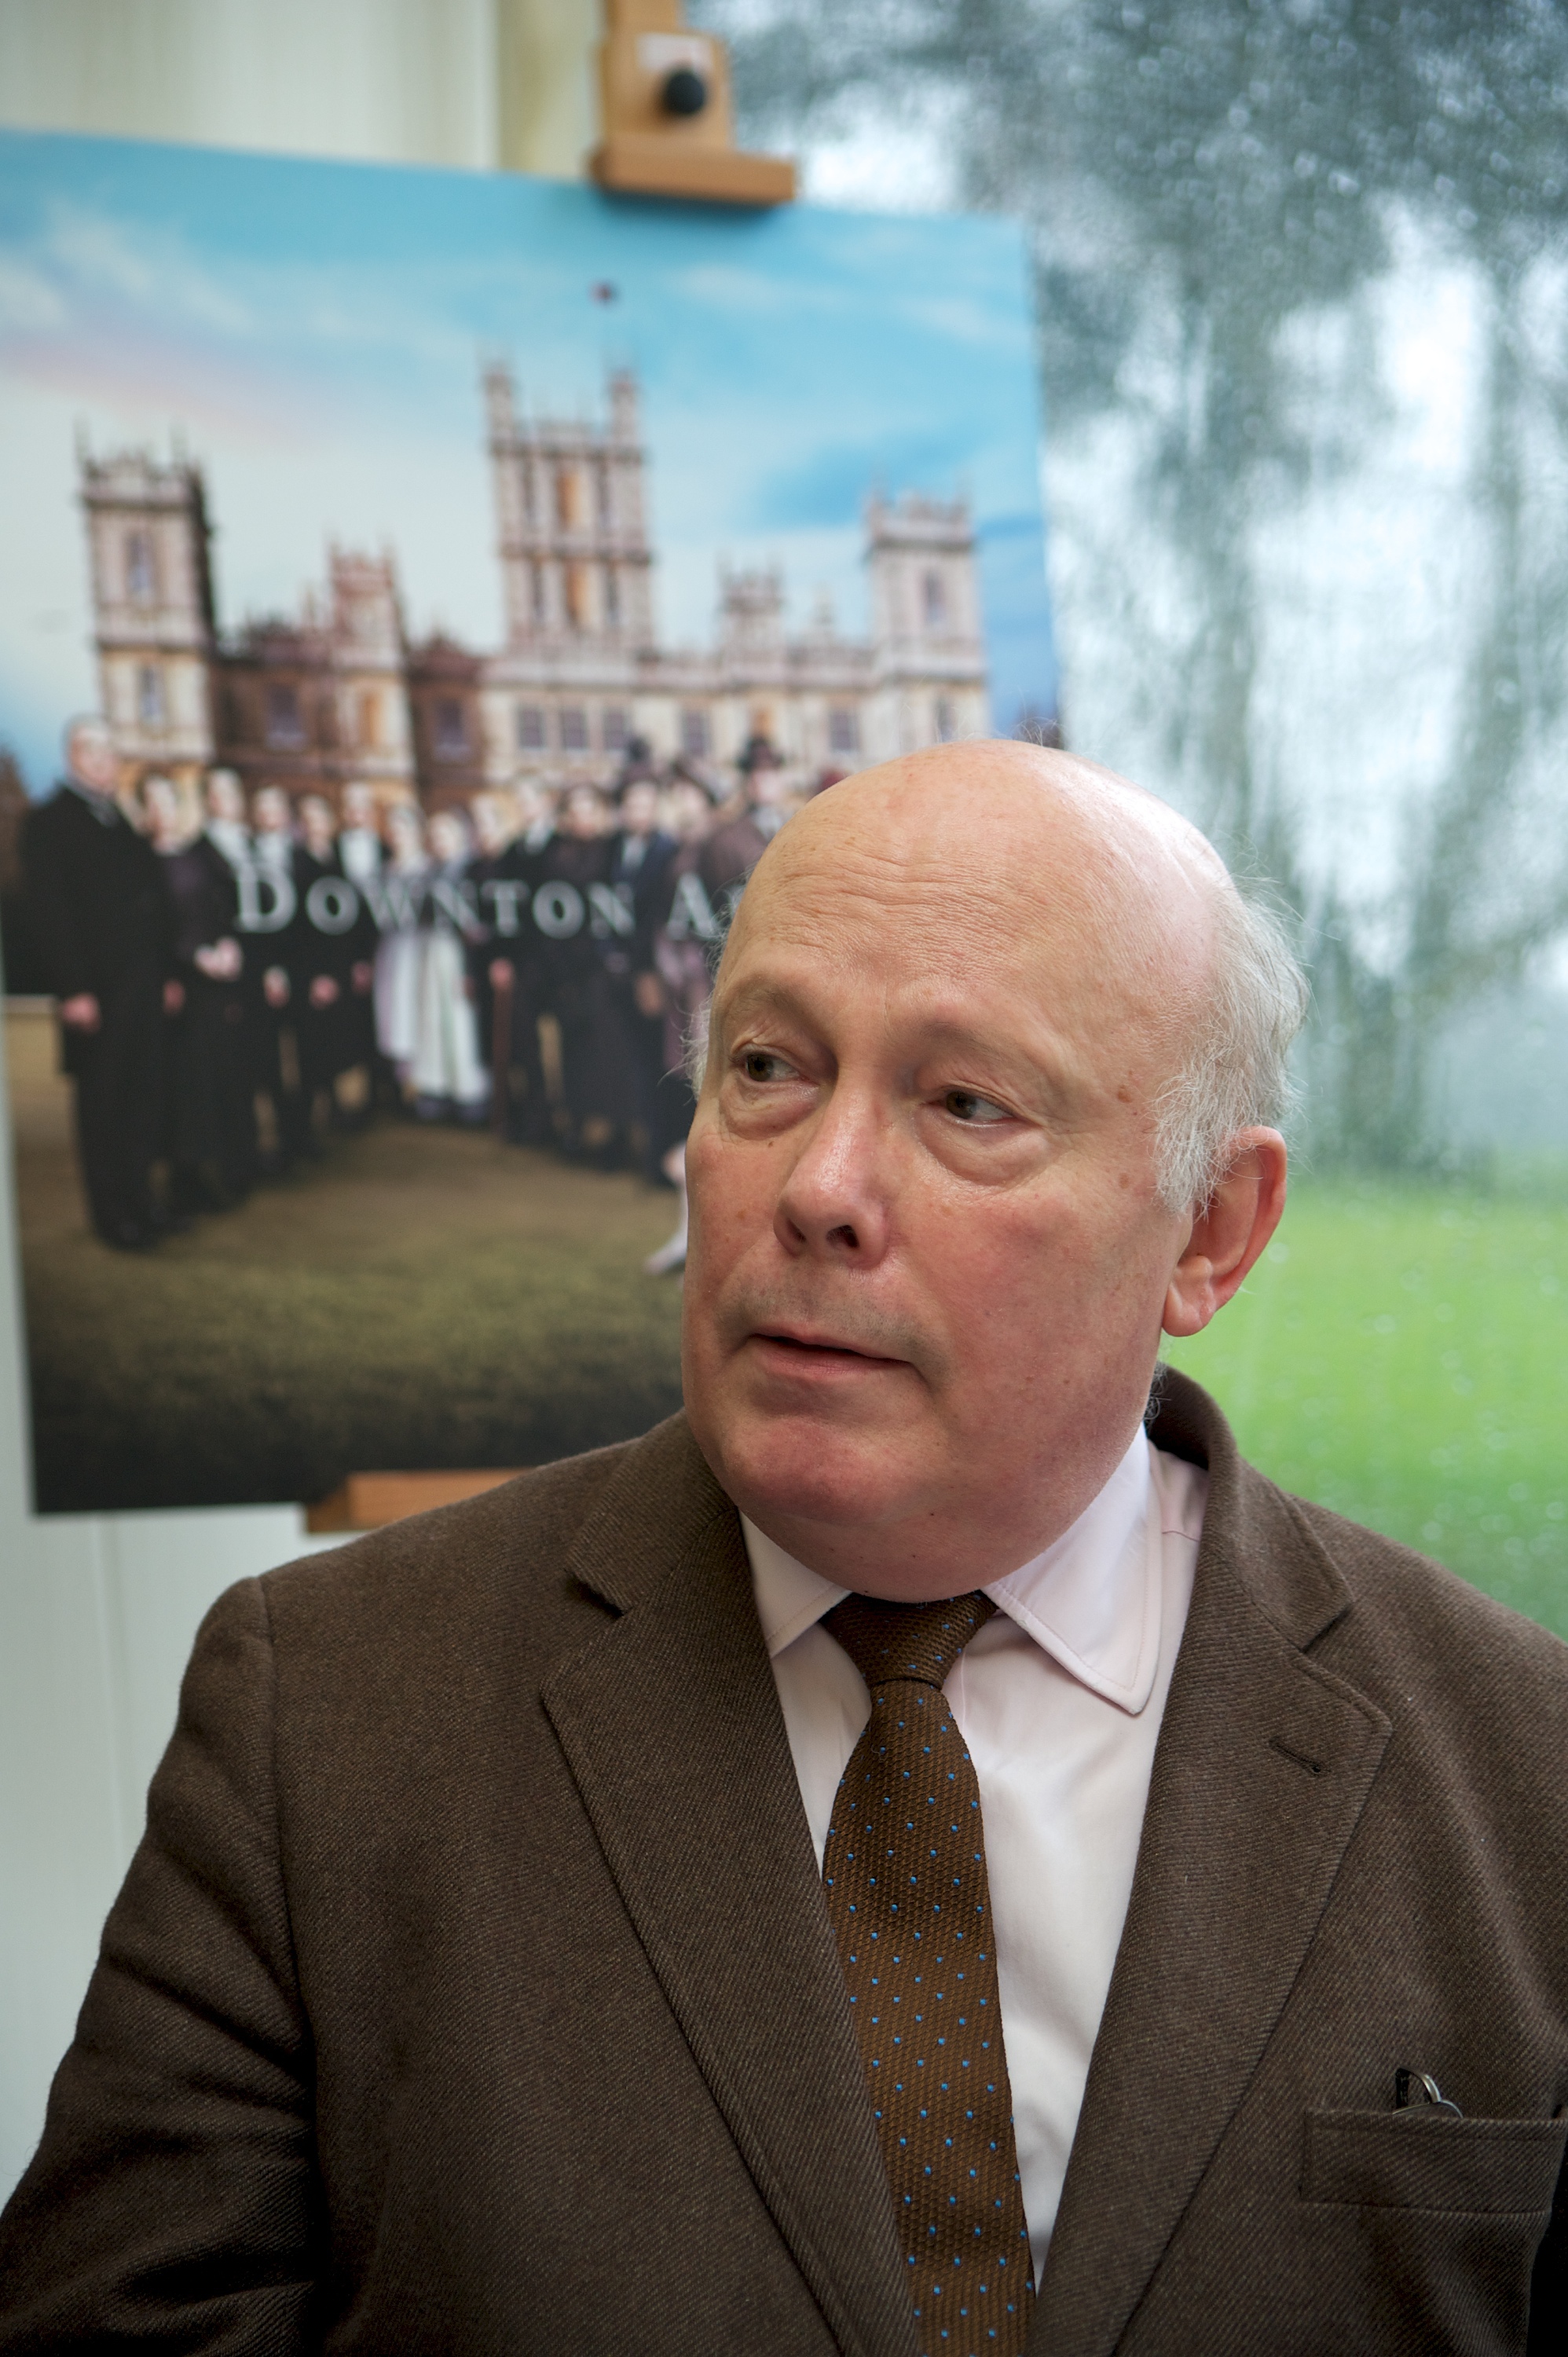 Julian Fellowes on the "Downton Abbey" set at Highclere Castle on February 16, 2015 in Newbury, England. (Vera Anderson&mdash;WireImage/Getty Images)